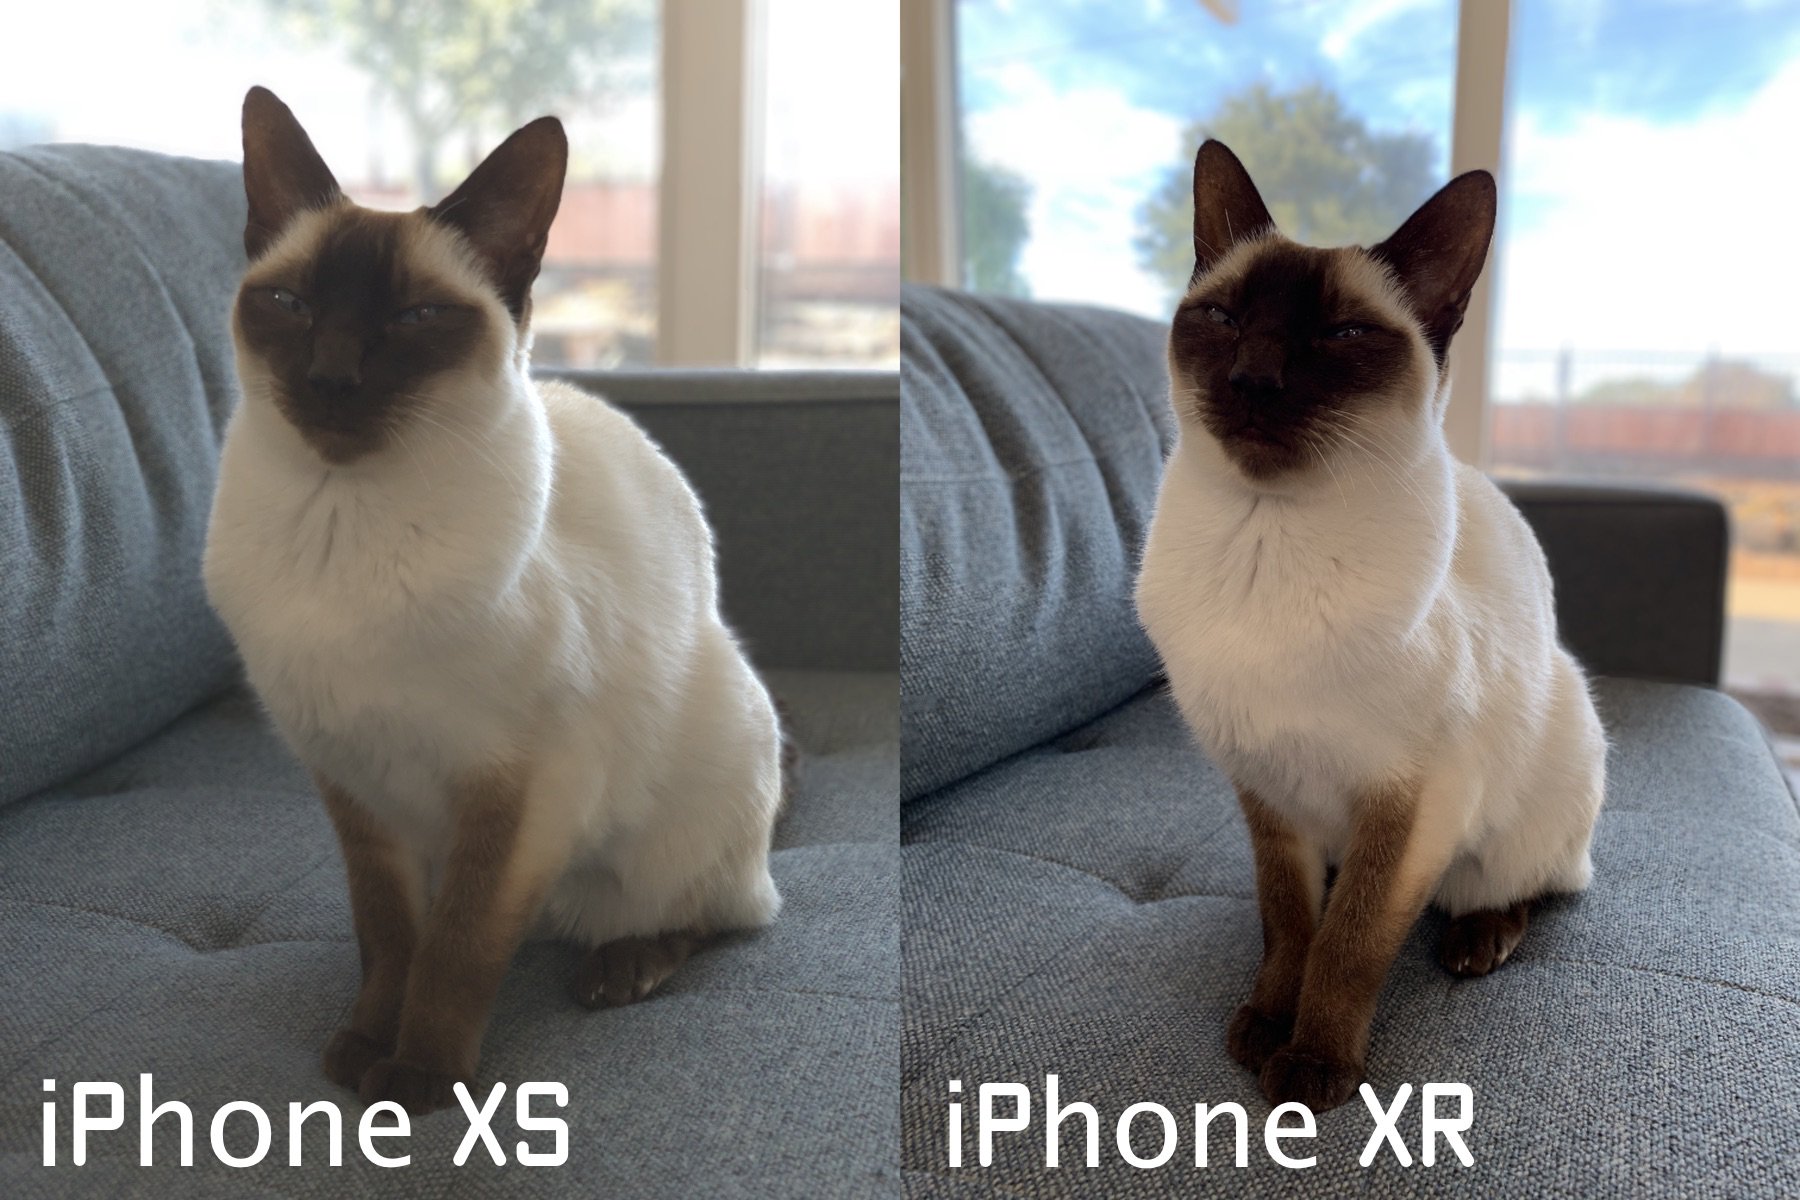 Halide app will allow you to use iPhone XR Portrait Mode on objects and animals [atualizado: saiu!]